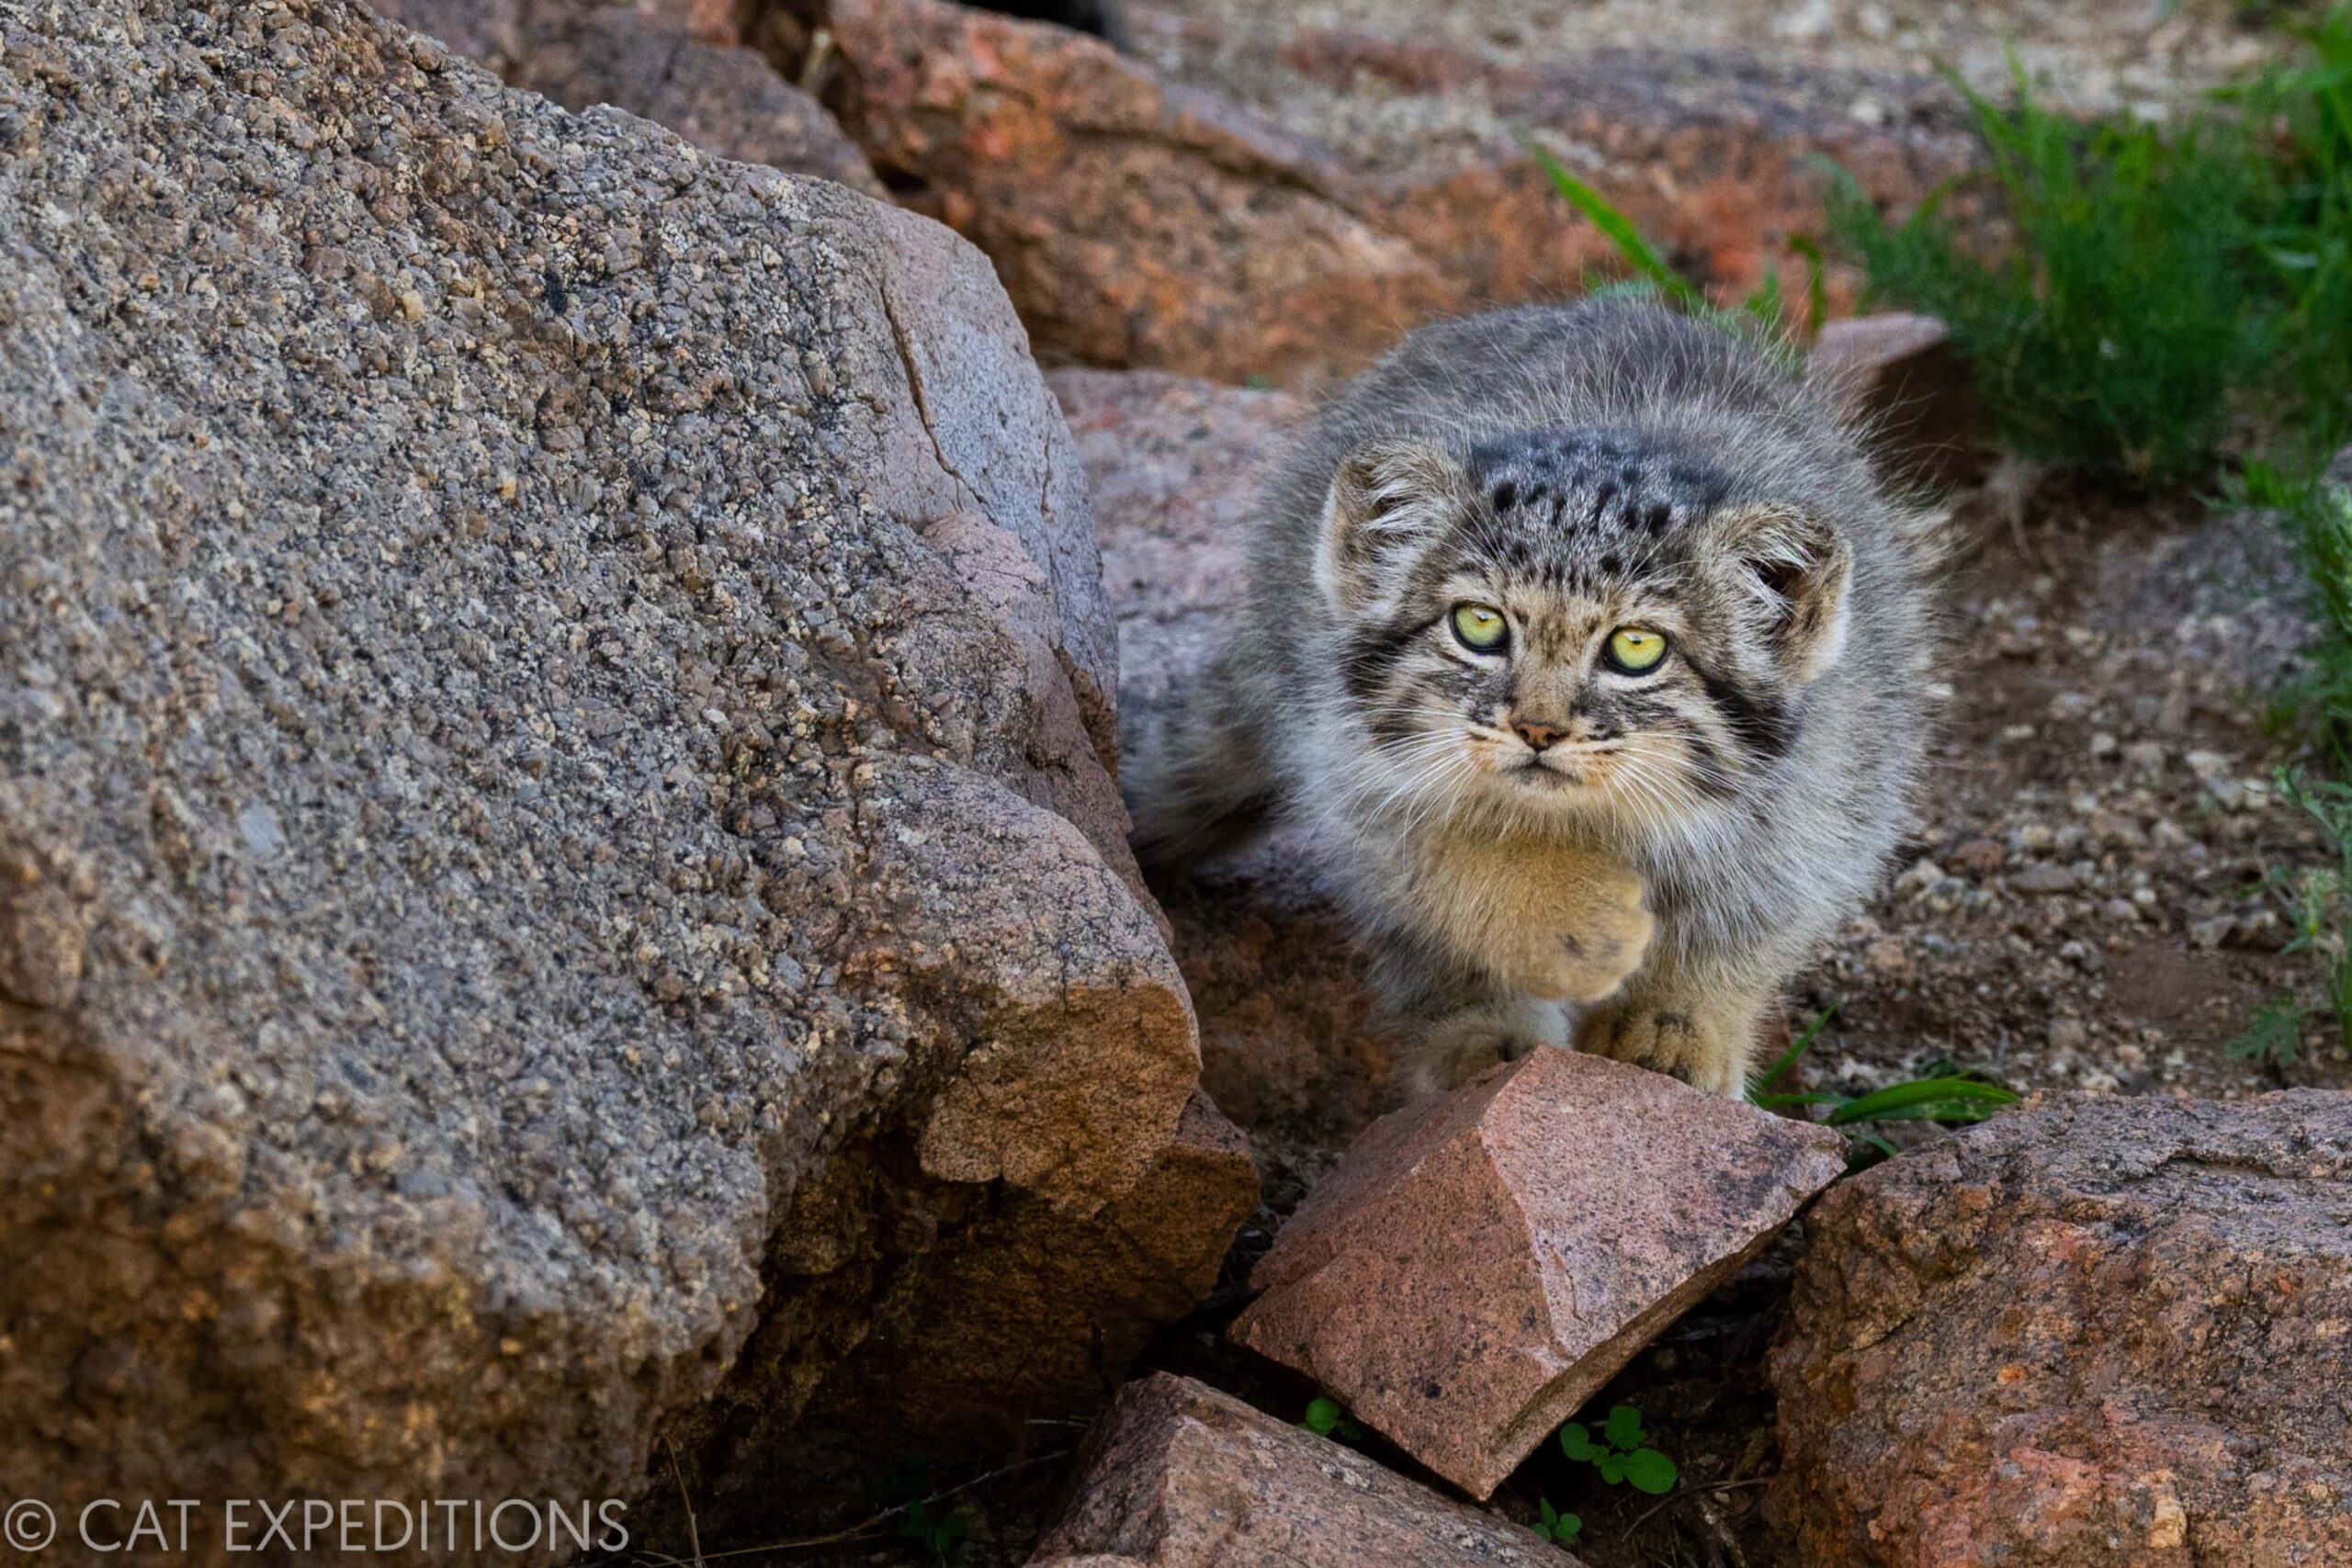 A manul kitten’s curiosity is peaked when it sees a songbird in the distance. It stalk ended
quickly as it realized it was not going to catch the bird.